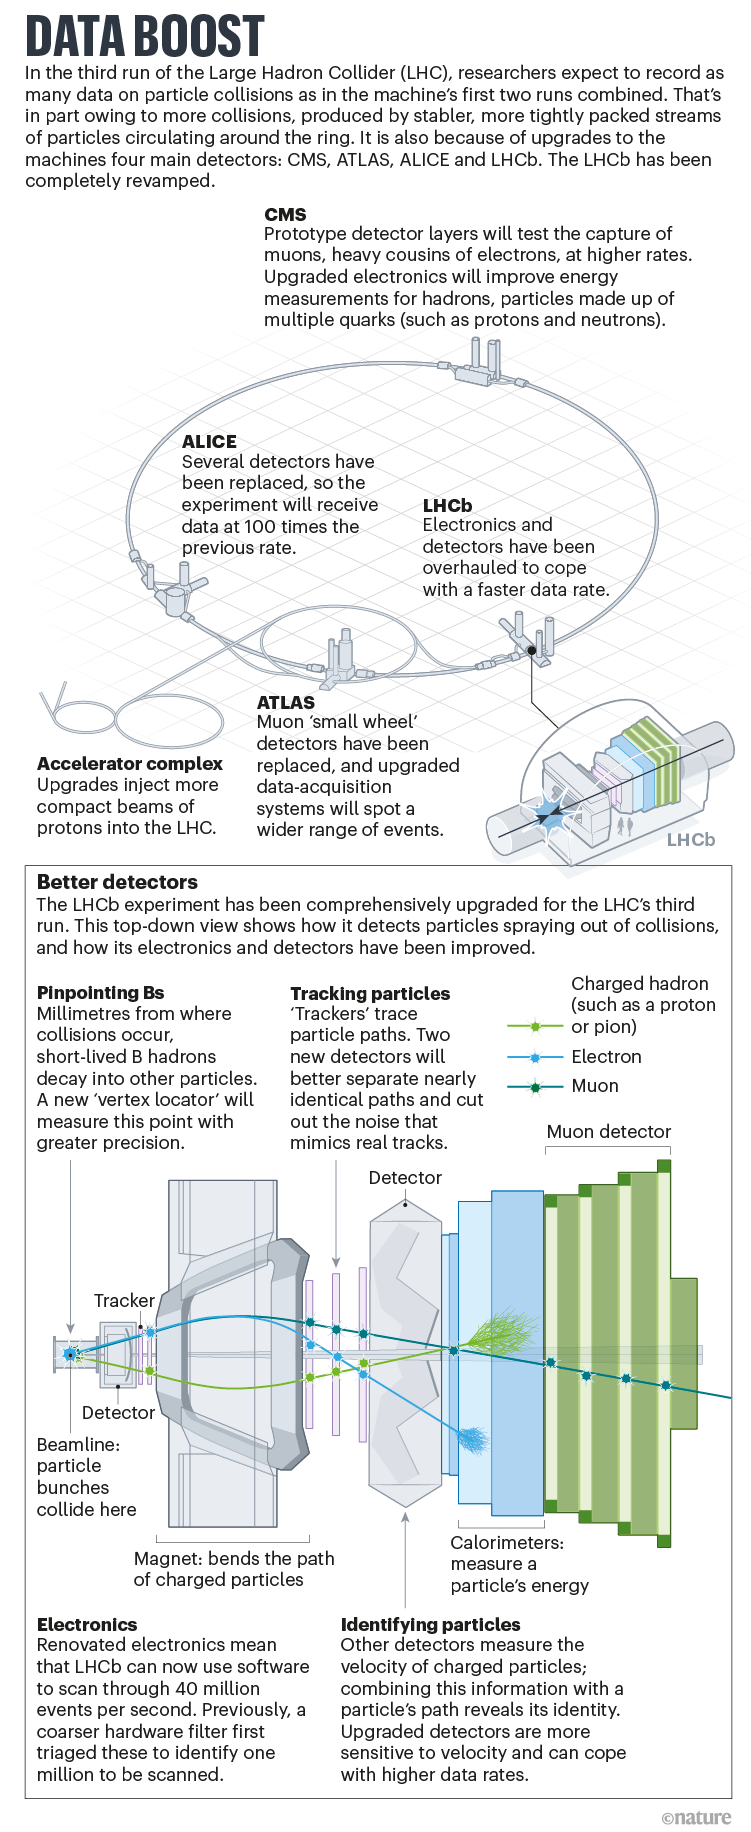 Data boost: Infographic that shows the upgrades that have happened at the LHC after the recent shutdown.